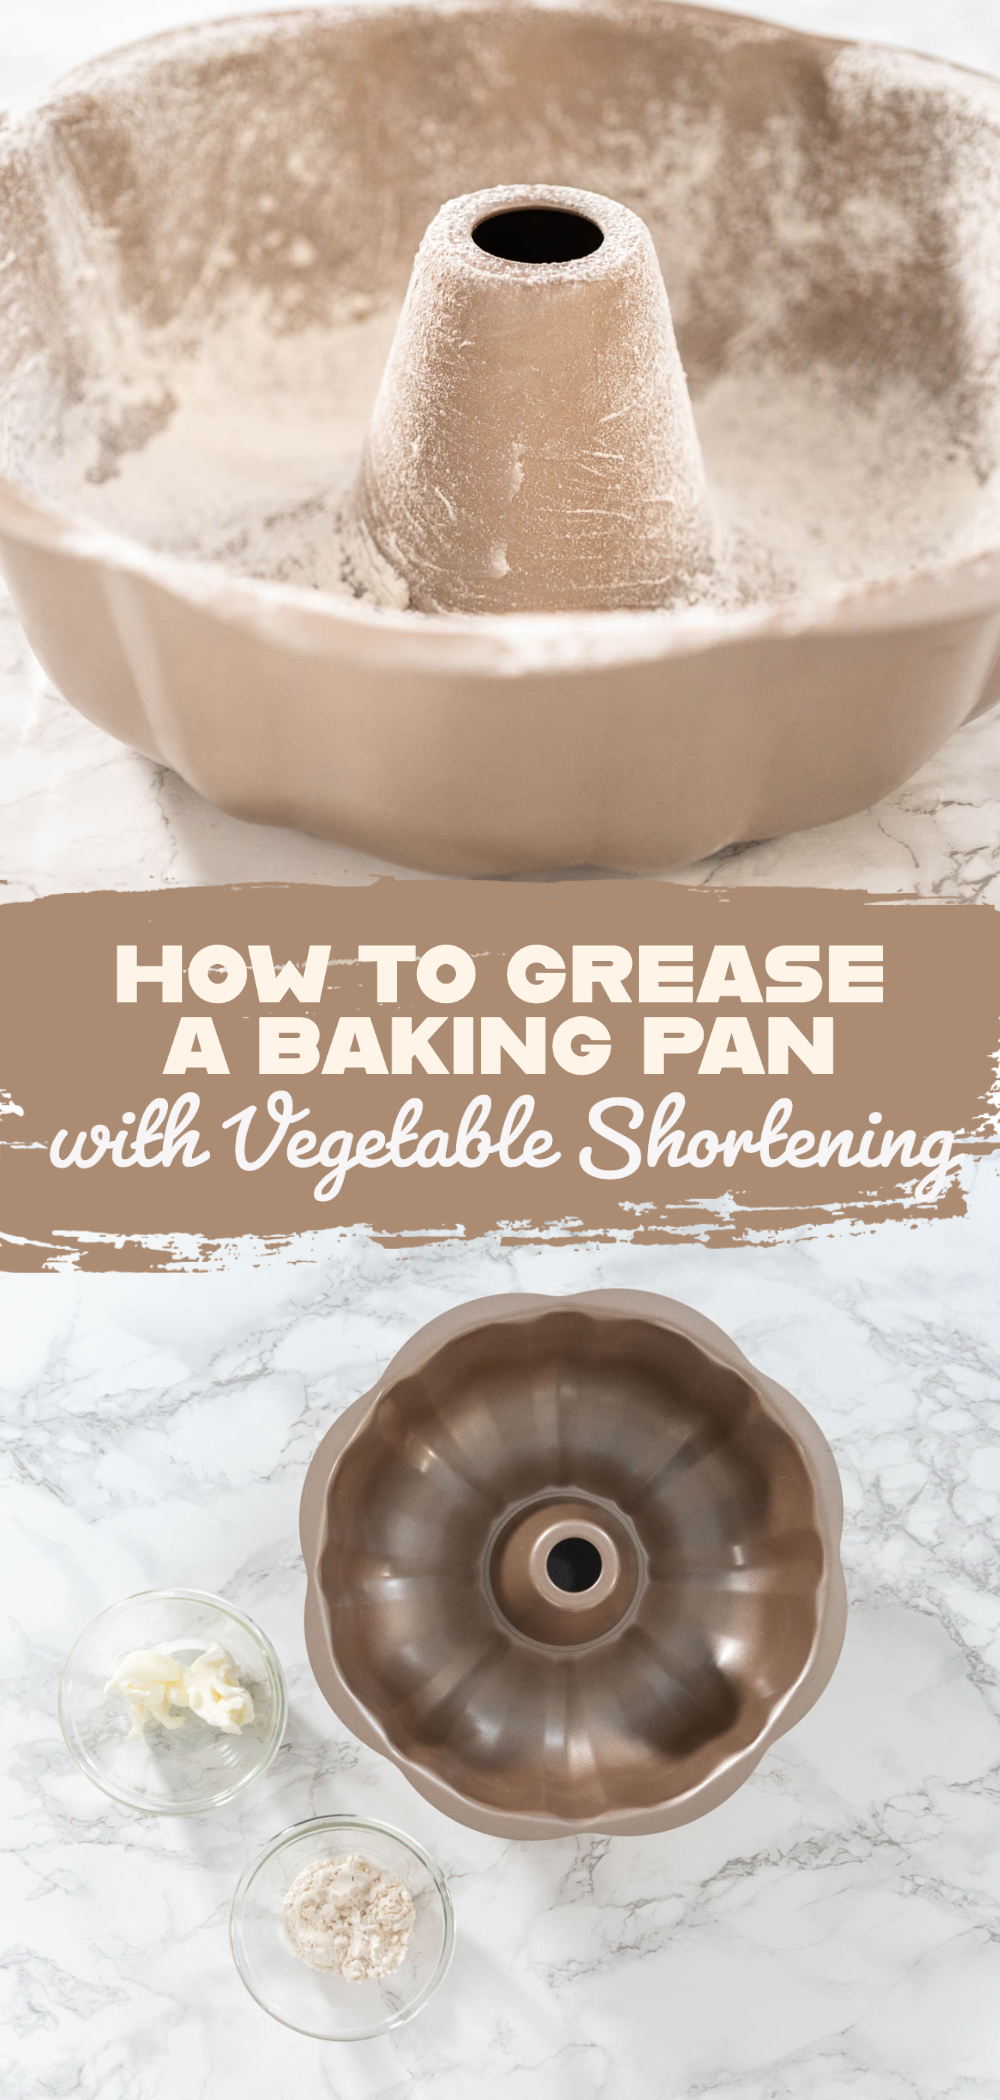 How to Grease a Baking Pan with Vegetable Shortening